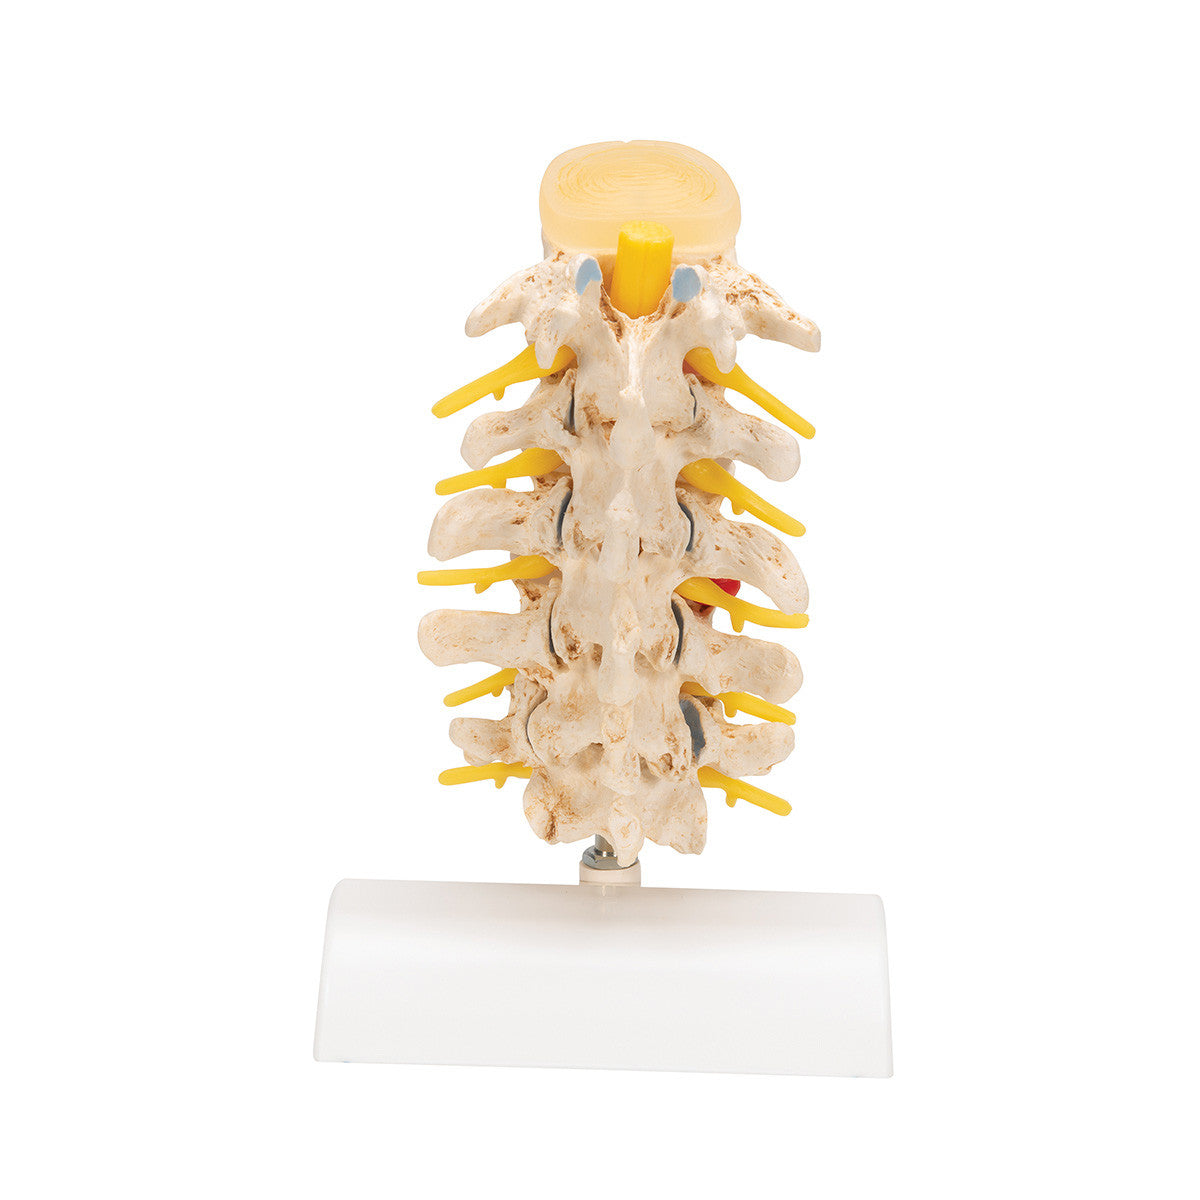 a795_04_1200_1200_stages-of-disc-prolapse-and-vertebral-degeneration-3b-smart-anatomy__51418.1589753278.1280.1280.jpg